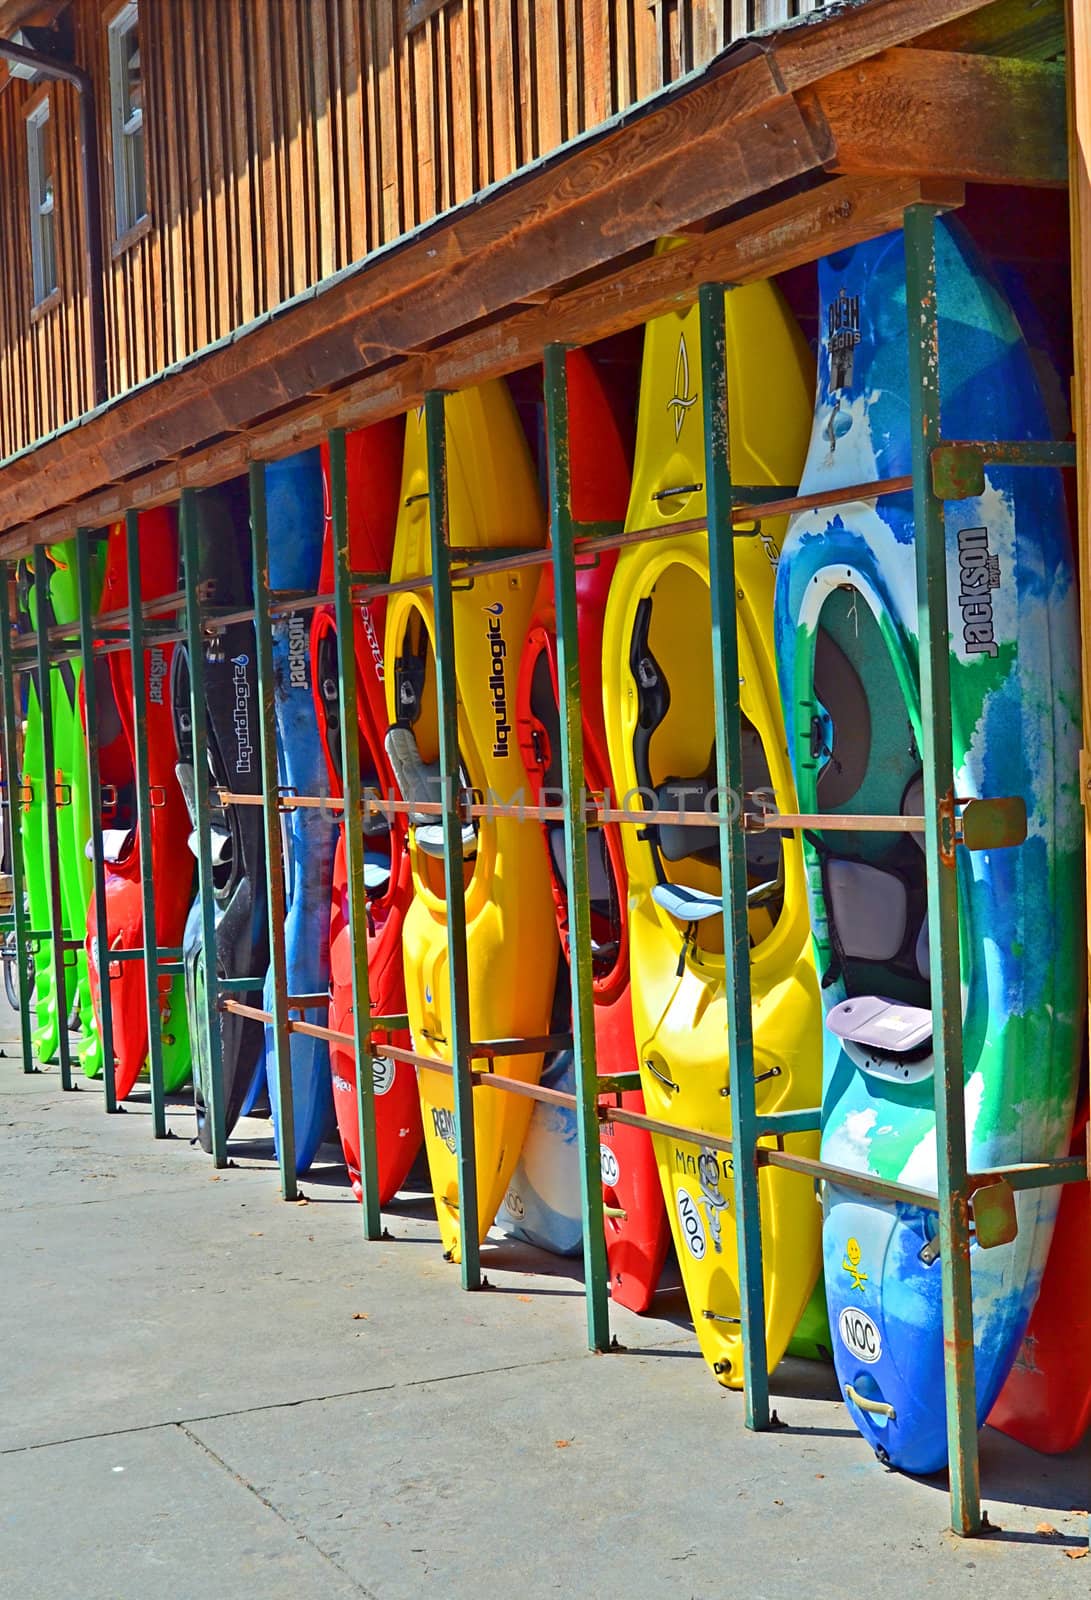 Kayaks on the side of an outdoor center building waiting to be rented.